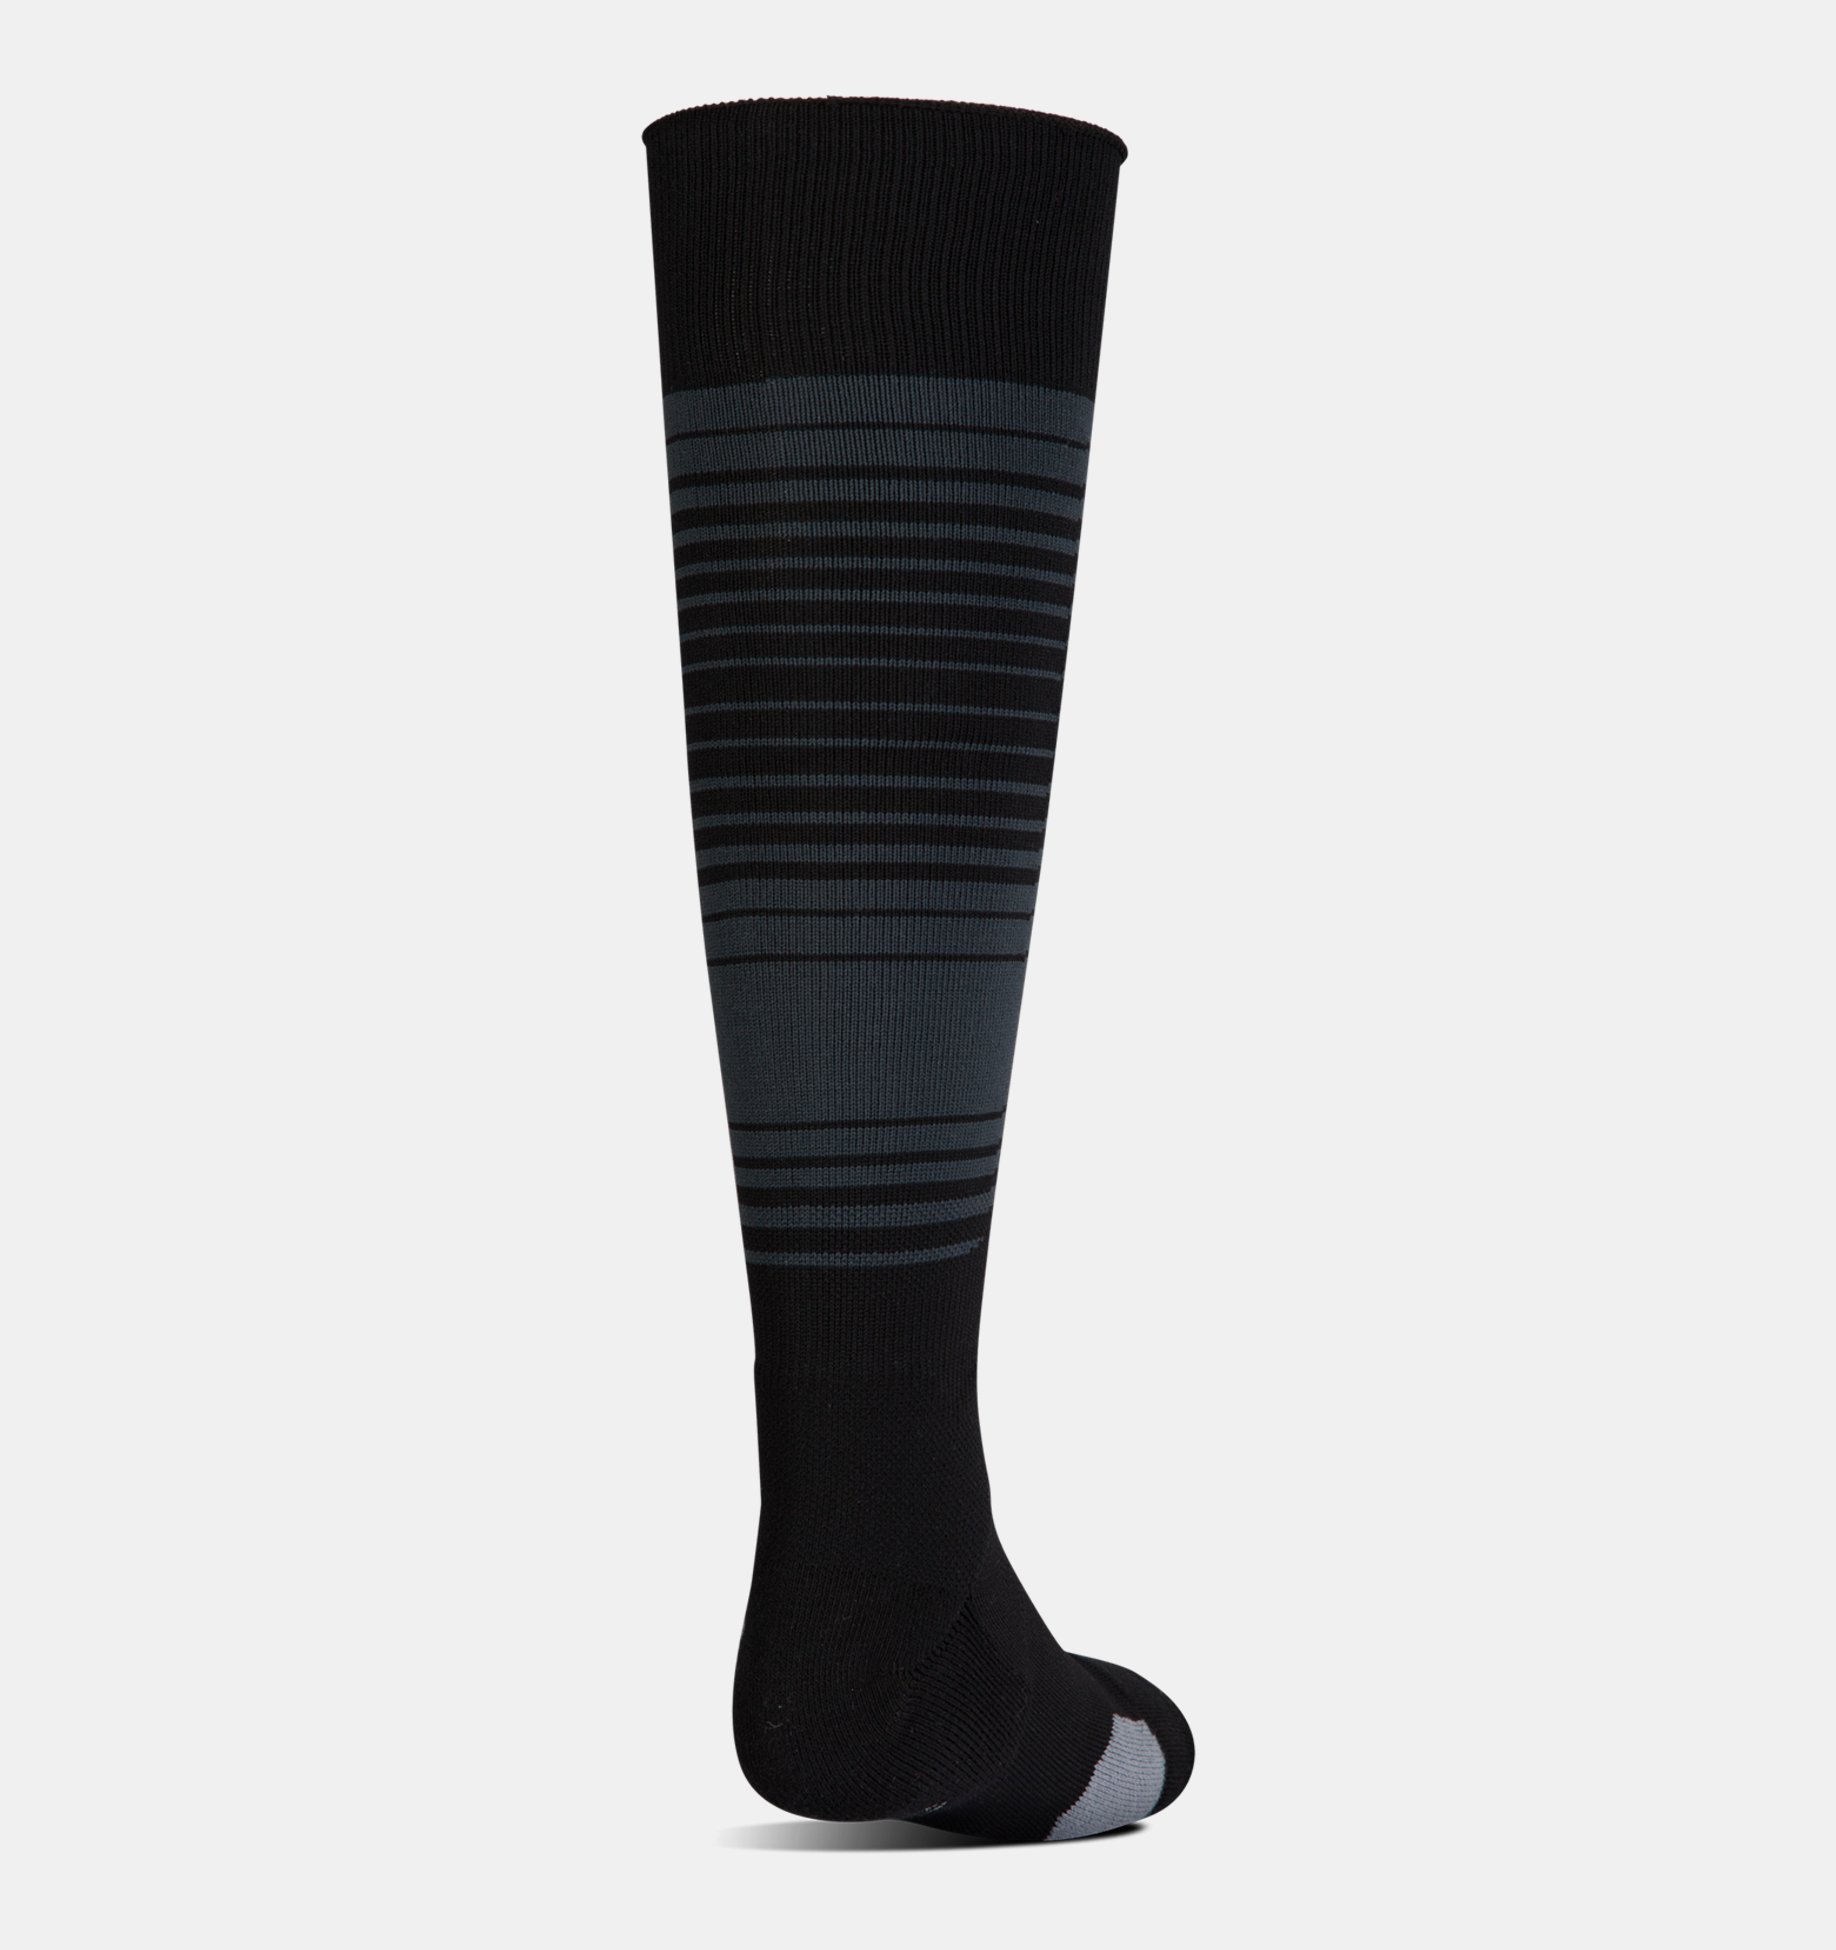 Under Armour Unisex Solid Over The Calf SocksFootball Rugby Soccer Hockey 